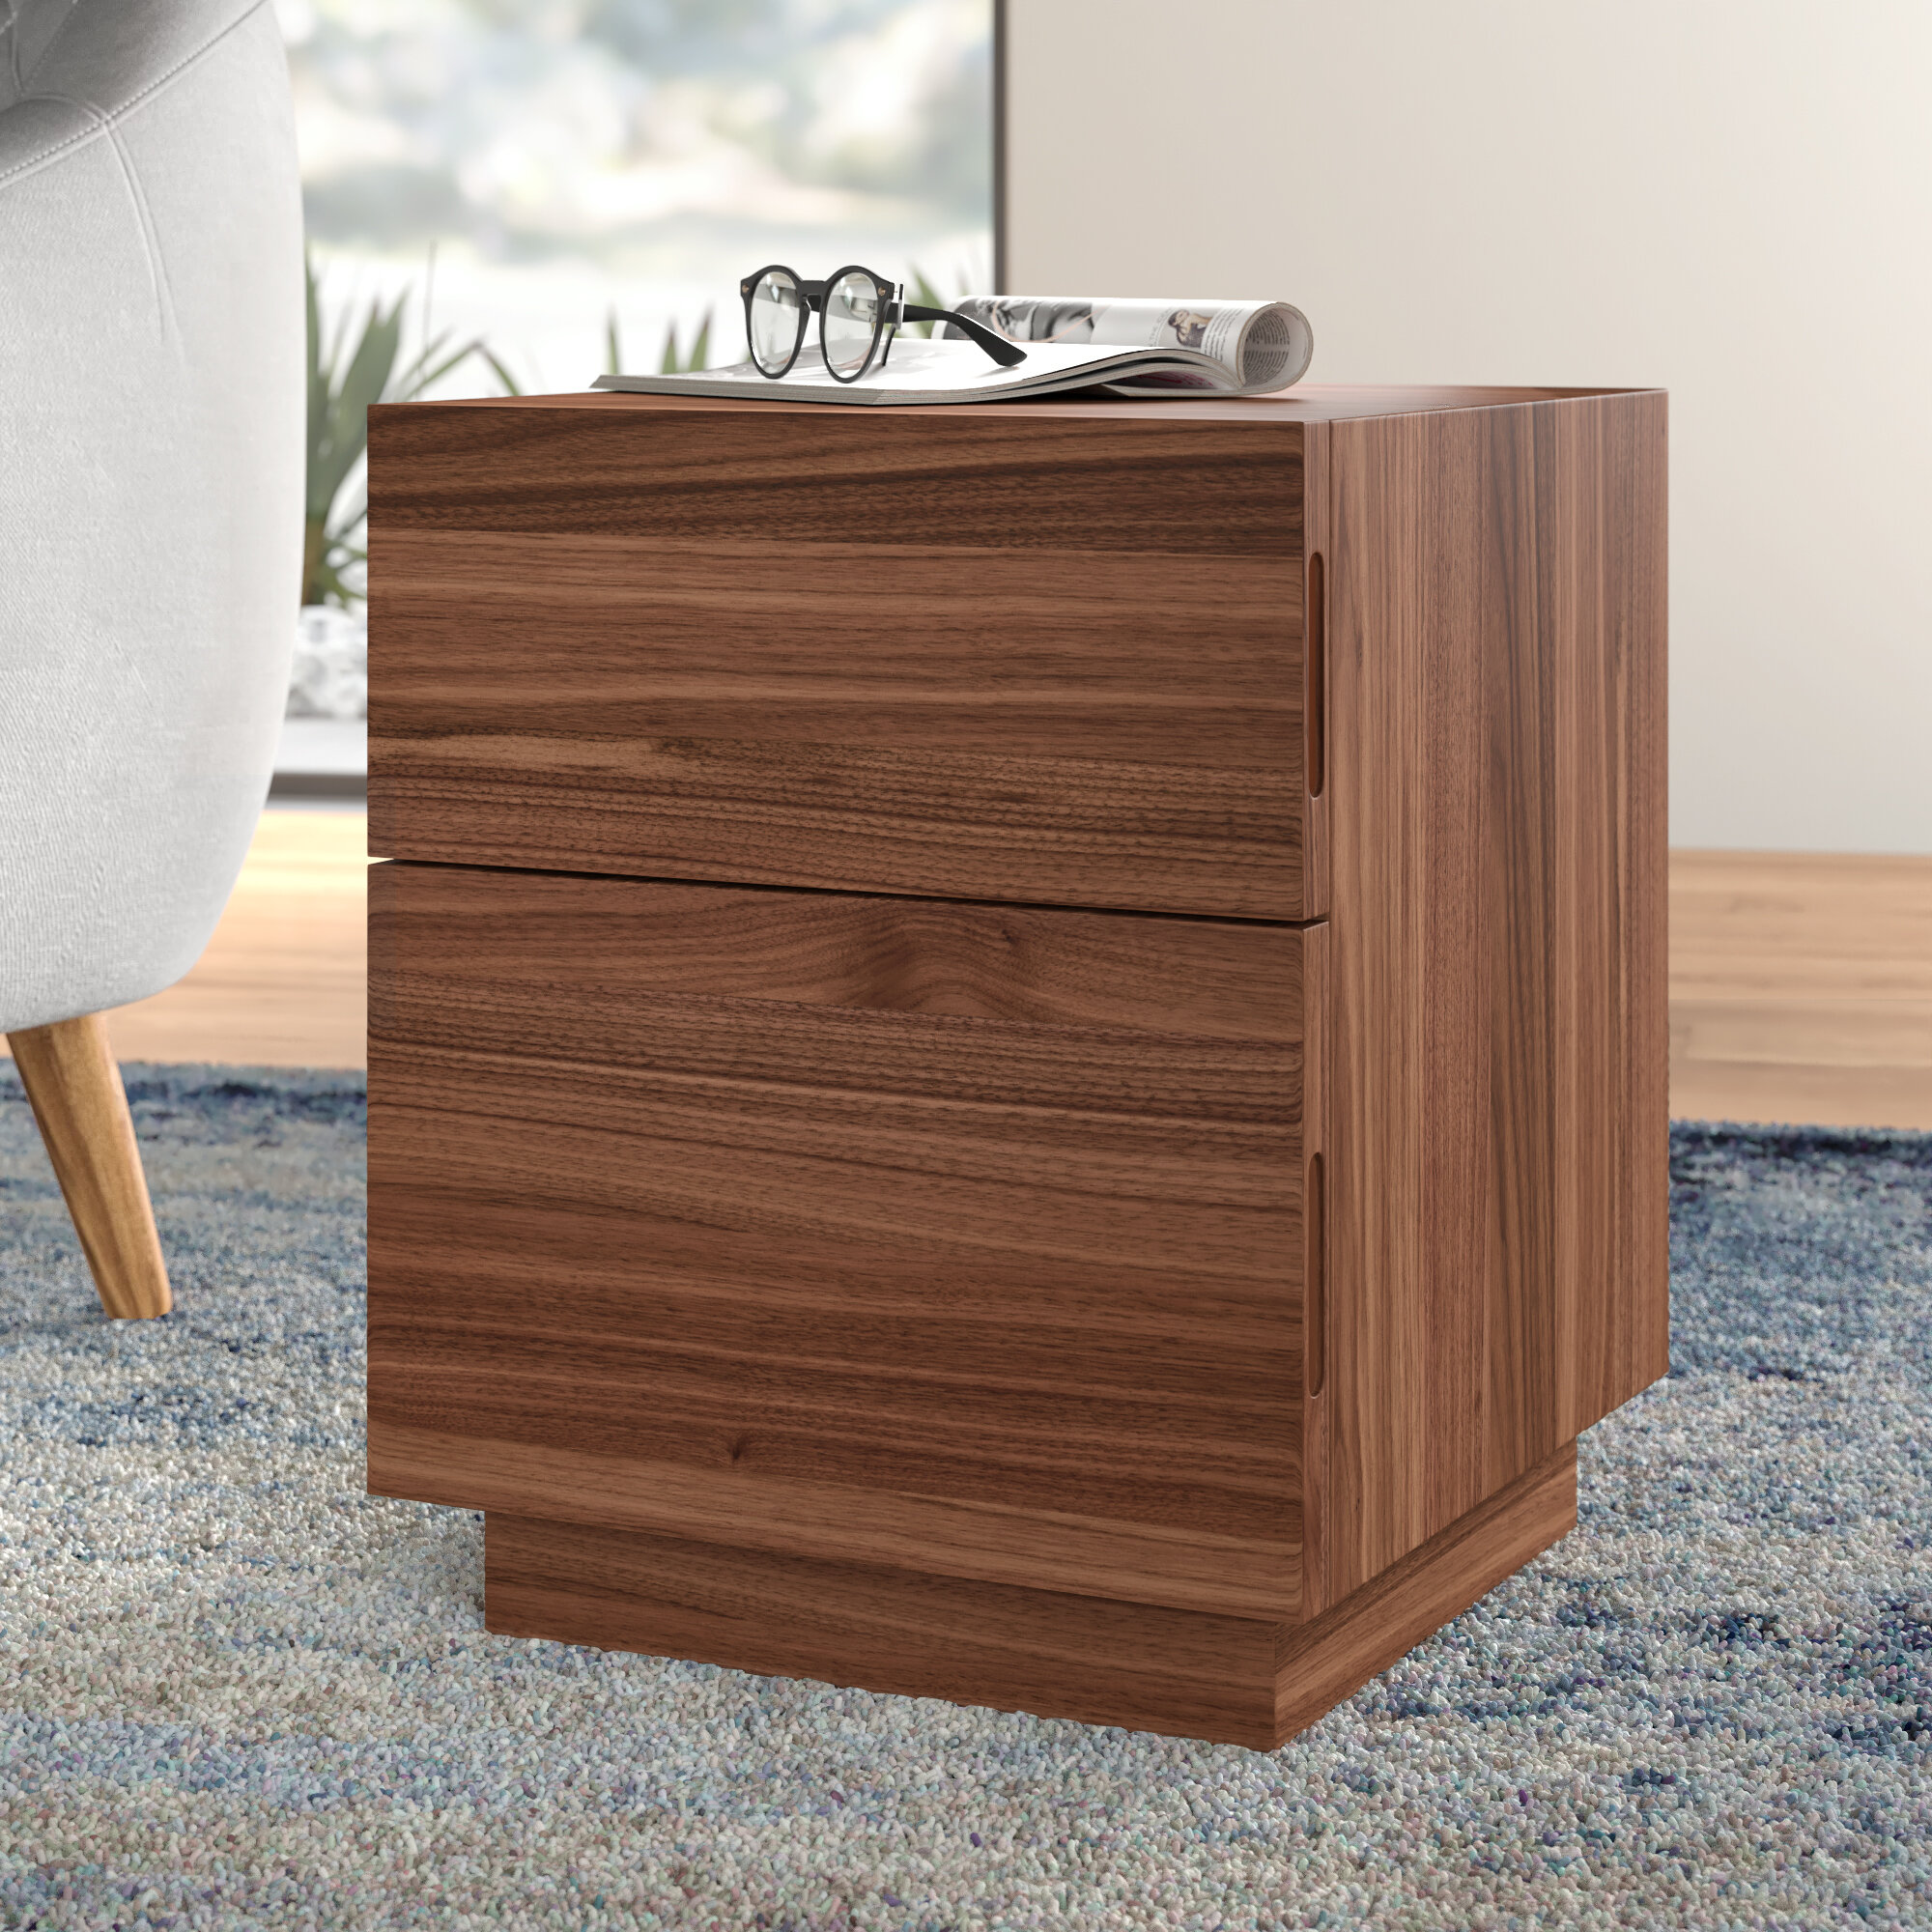 baby boom chest of drawers